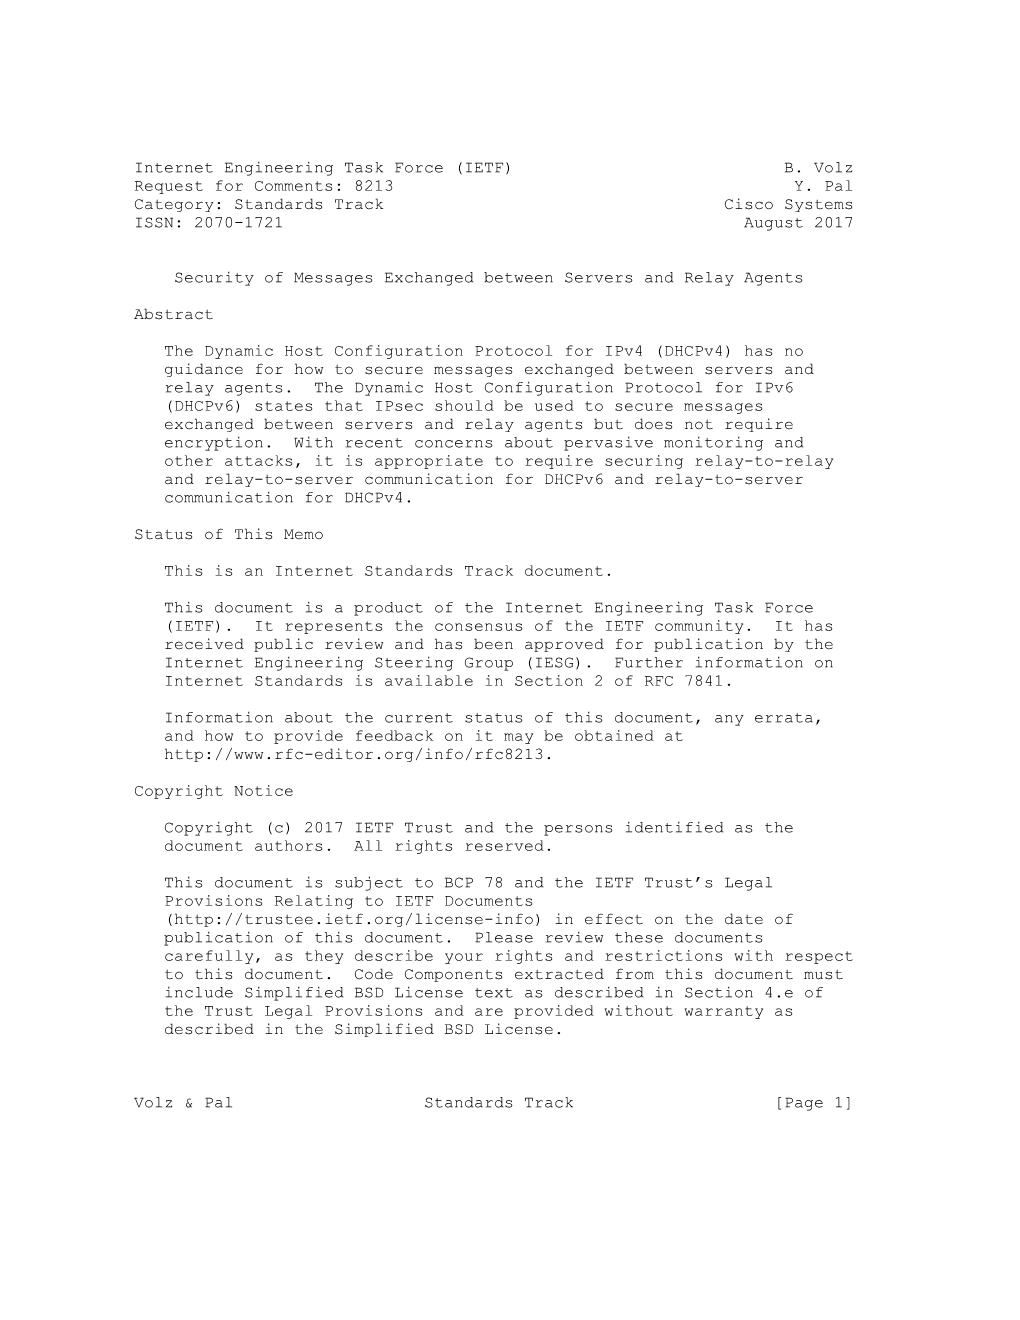 Internet Engineering Task Force (IETF) B. Volz Request for Comments: 8213 Y